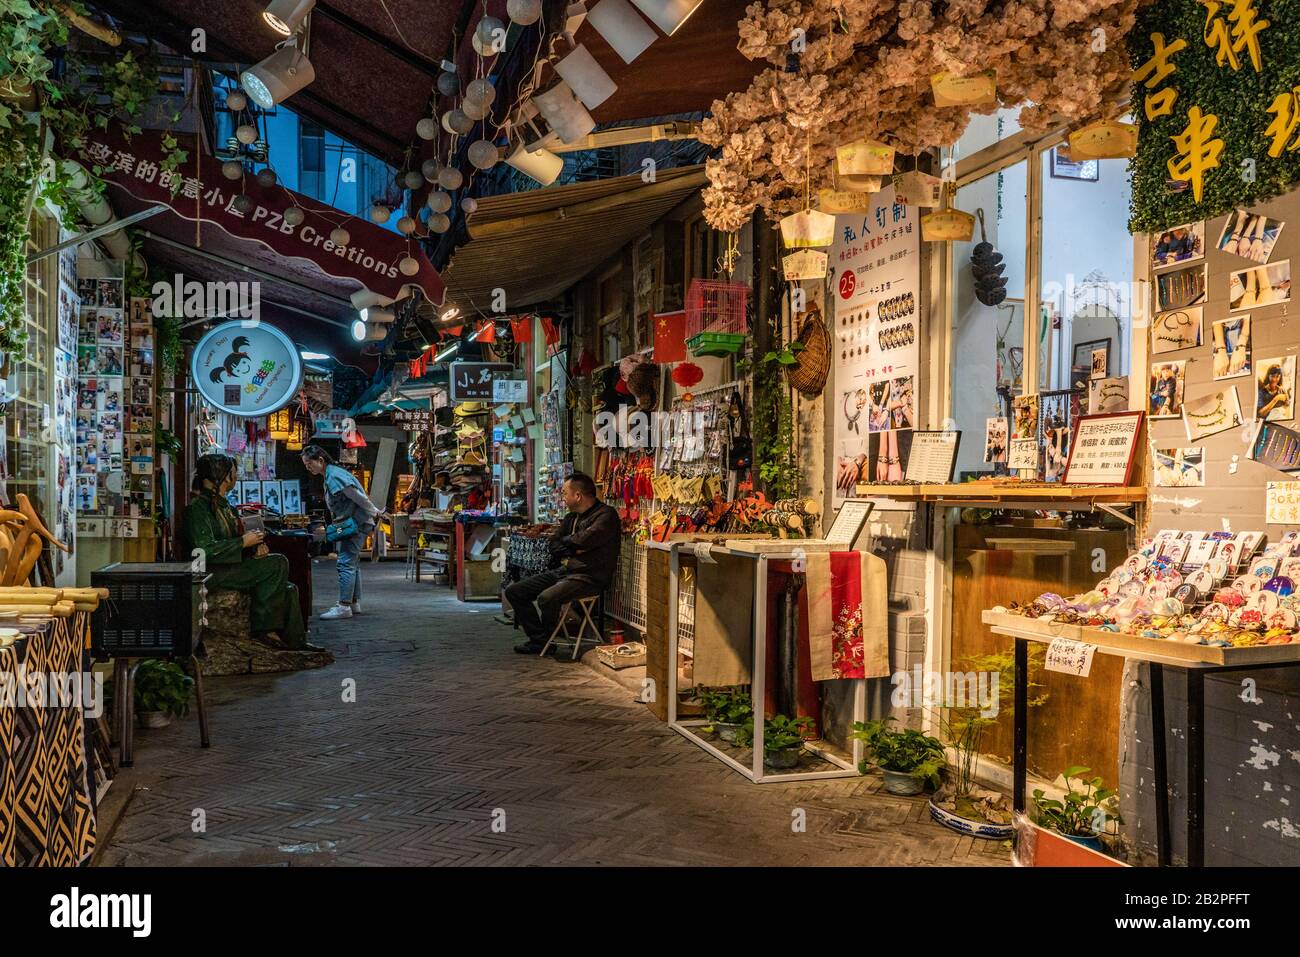 SHANGHAI, CHINA, OCTOBER 31: Arts and crafts shops in Tianzifang, a famous shopping district in the old French Concession  on October 31, 2019 in Shan Stock Photo